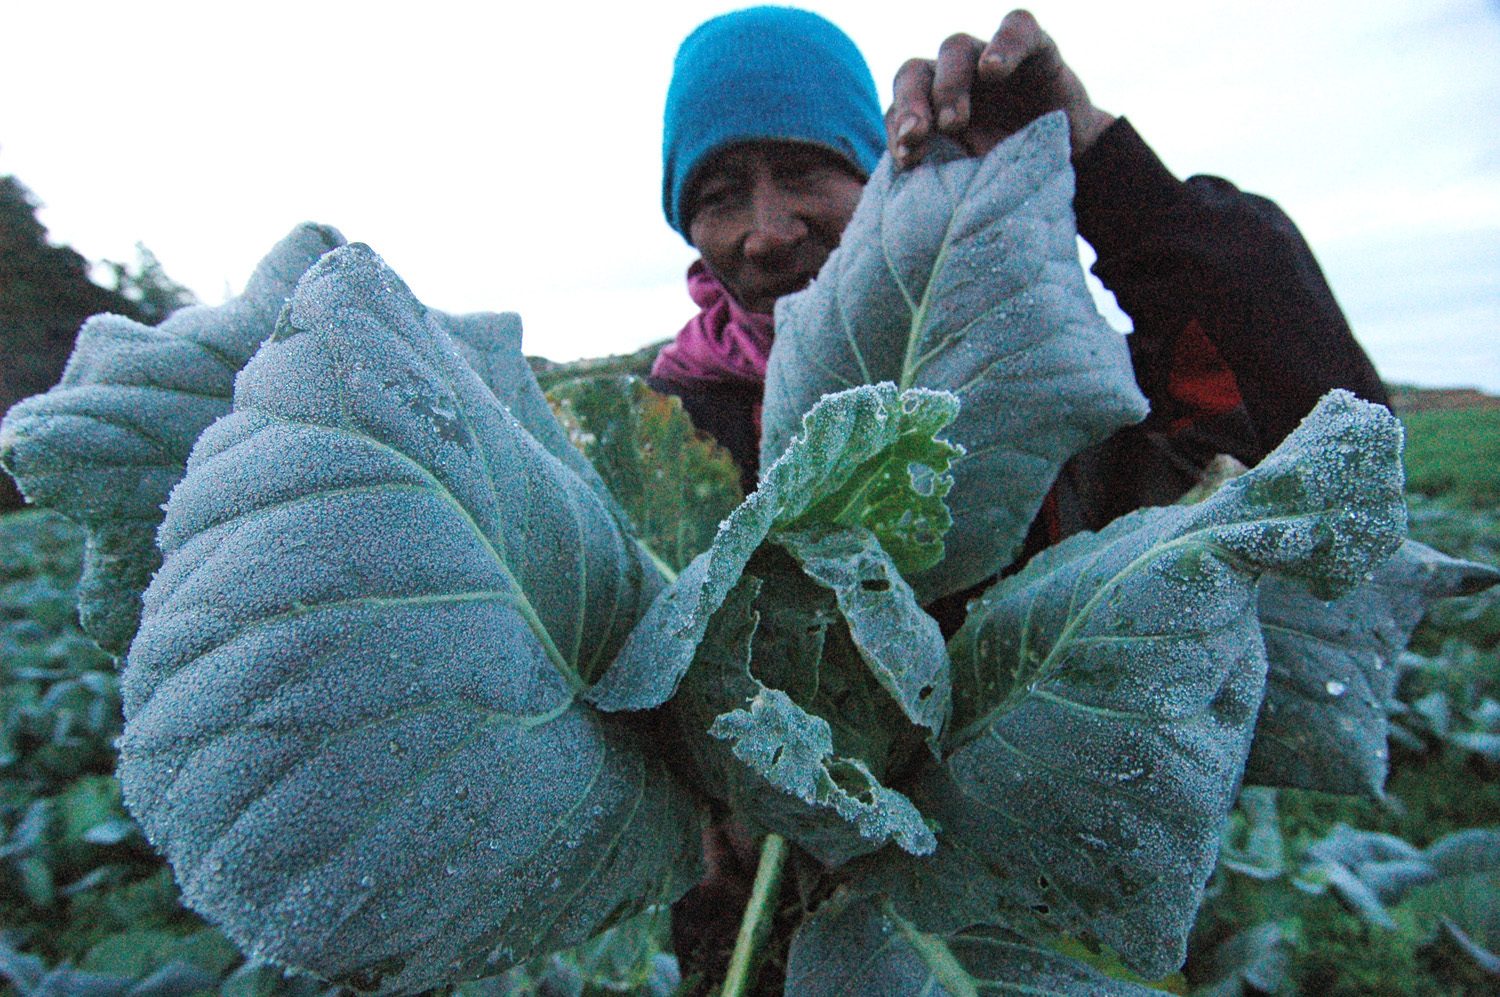 FROSTED VEGETABLES. A farmer in Atok, Benguet shows his frosted farm produce amid the plunging temperature that caused frost in some parts of the town as temperature dipped to 9.4 degrees celsius on January 30, 2019. Photo by Mau Victa/Rappler  